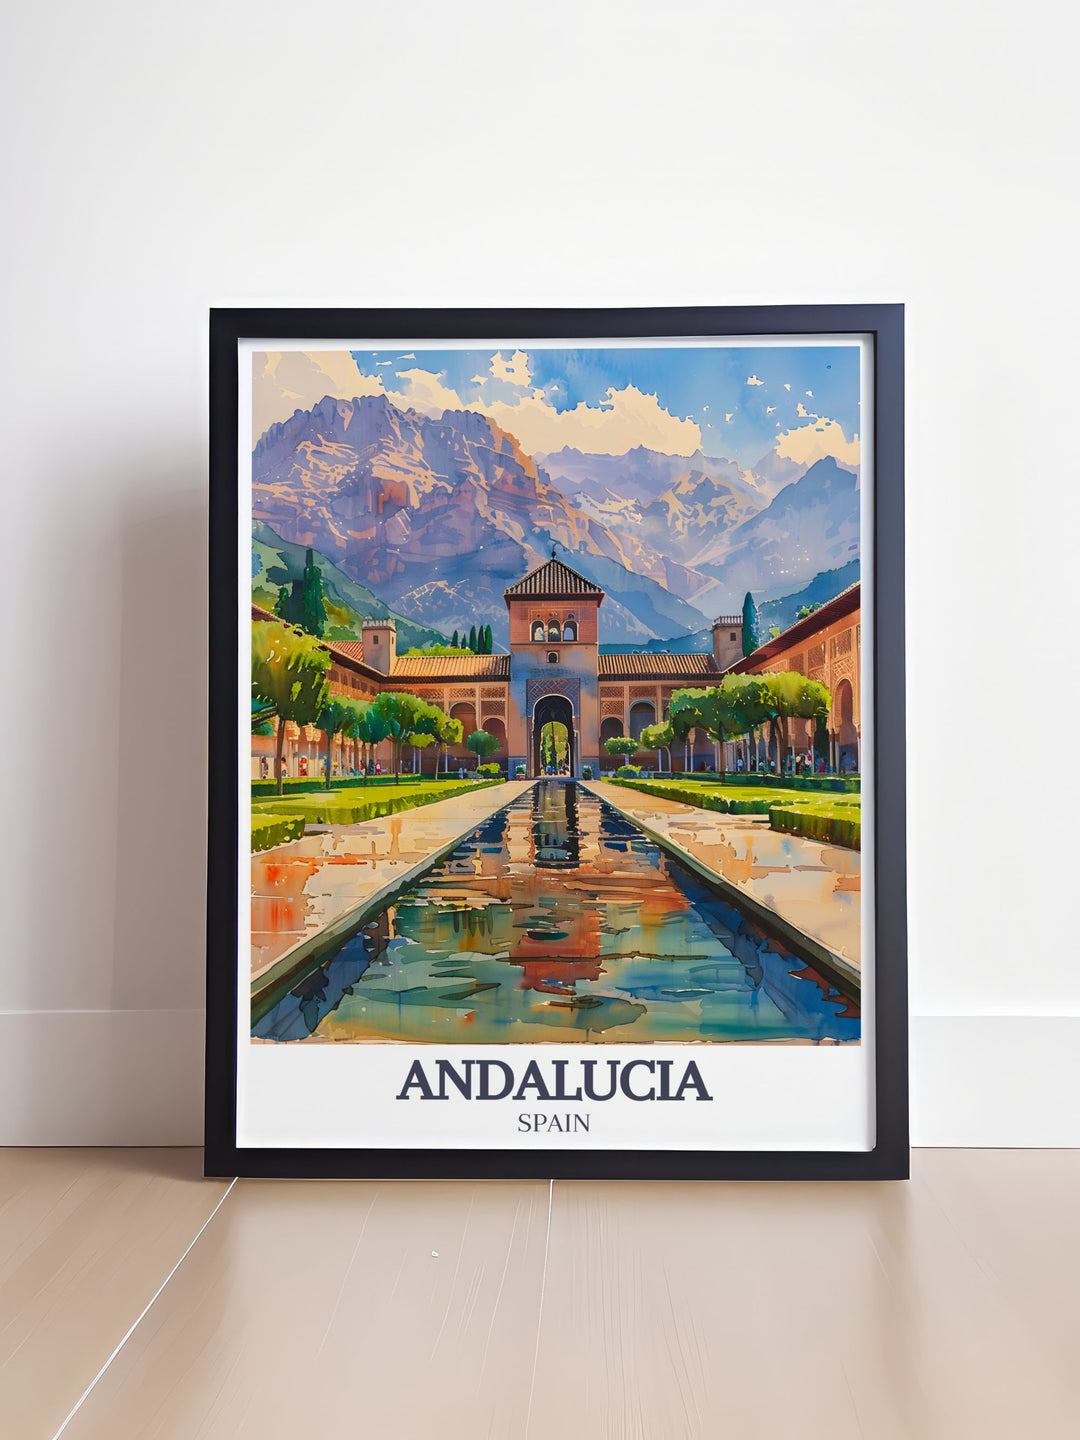 This poster features the beautiful Alhambra Palace with its stunning Islamic architecture and the majestic Sierra Nevada Mountains, capturing the essence of Spanish heritage and adding a regal touch to your decor.